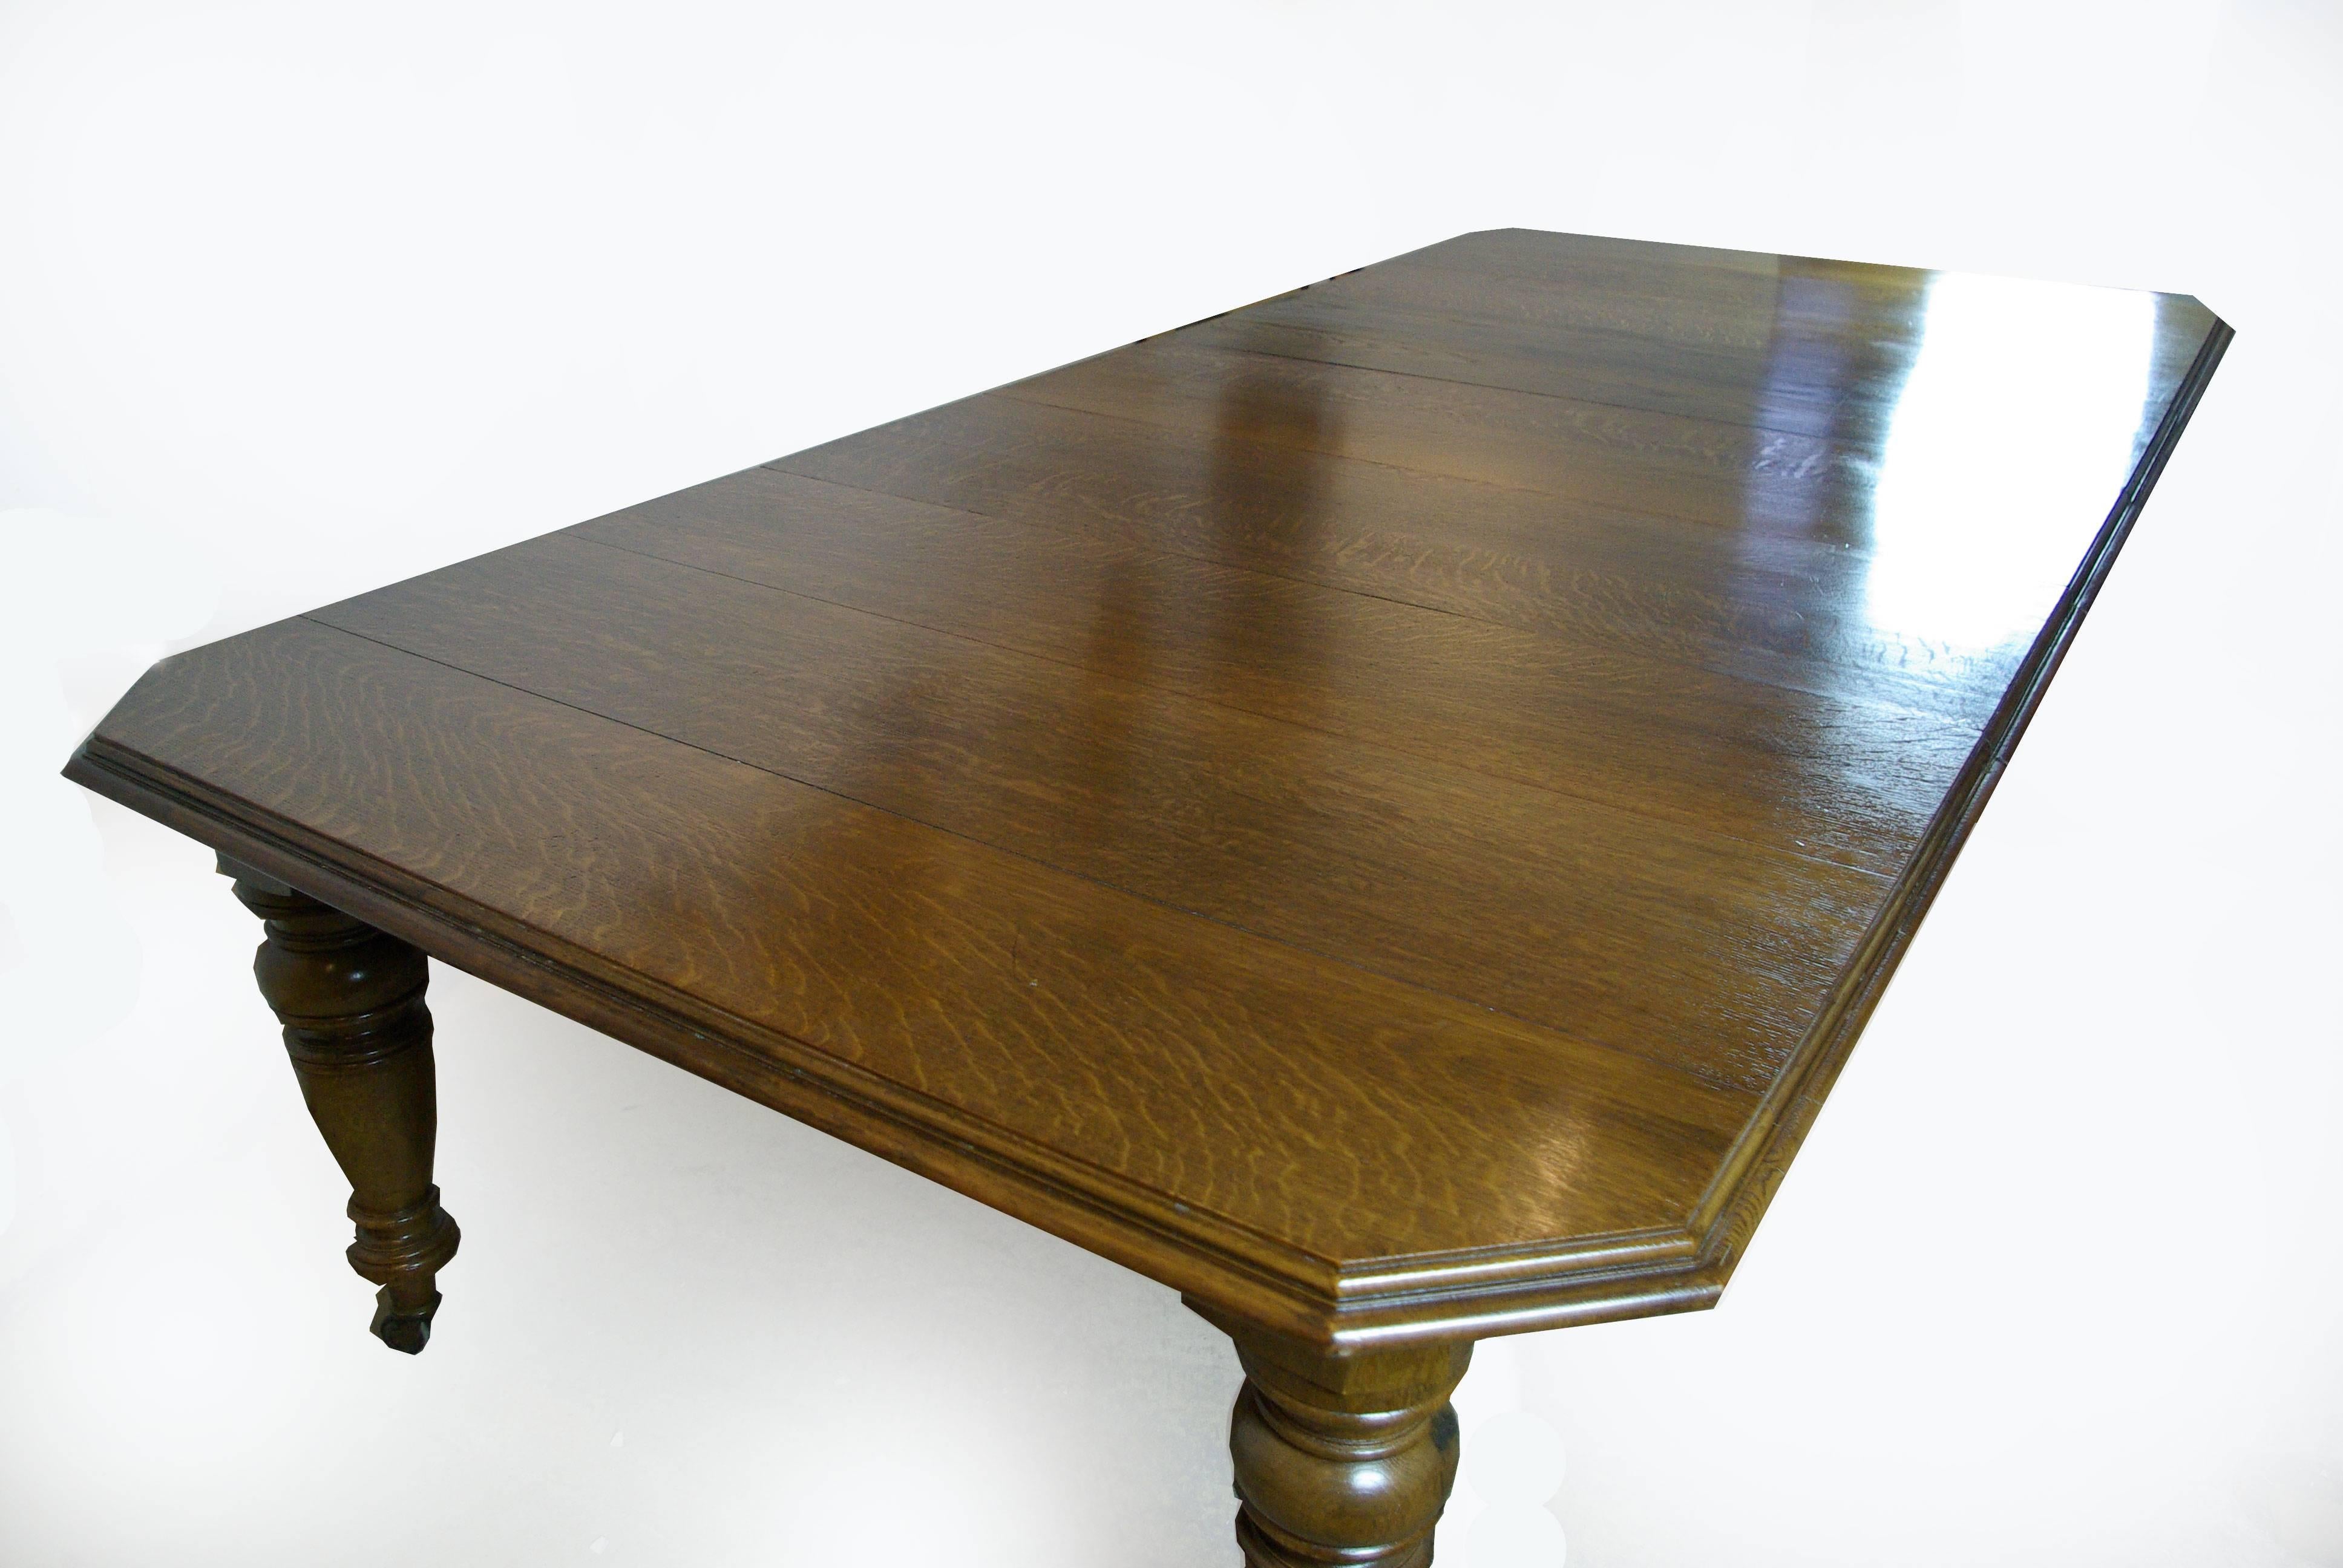 Scotland,
1880. Original finish solid oak.
Rectangular top with moulded edge.
Stands on four substantial turned legs with castors.
Comes with a winder handle.

$2500.

JR07
Measures: Closed 60" W x 72" L x 29.5" H (24"